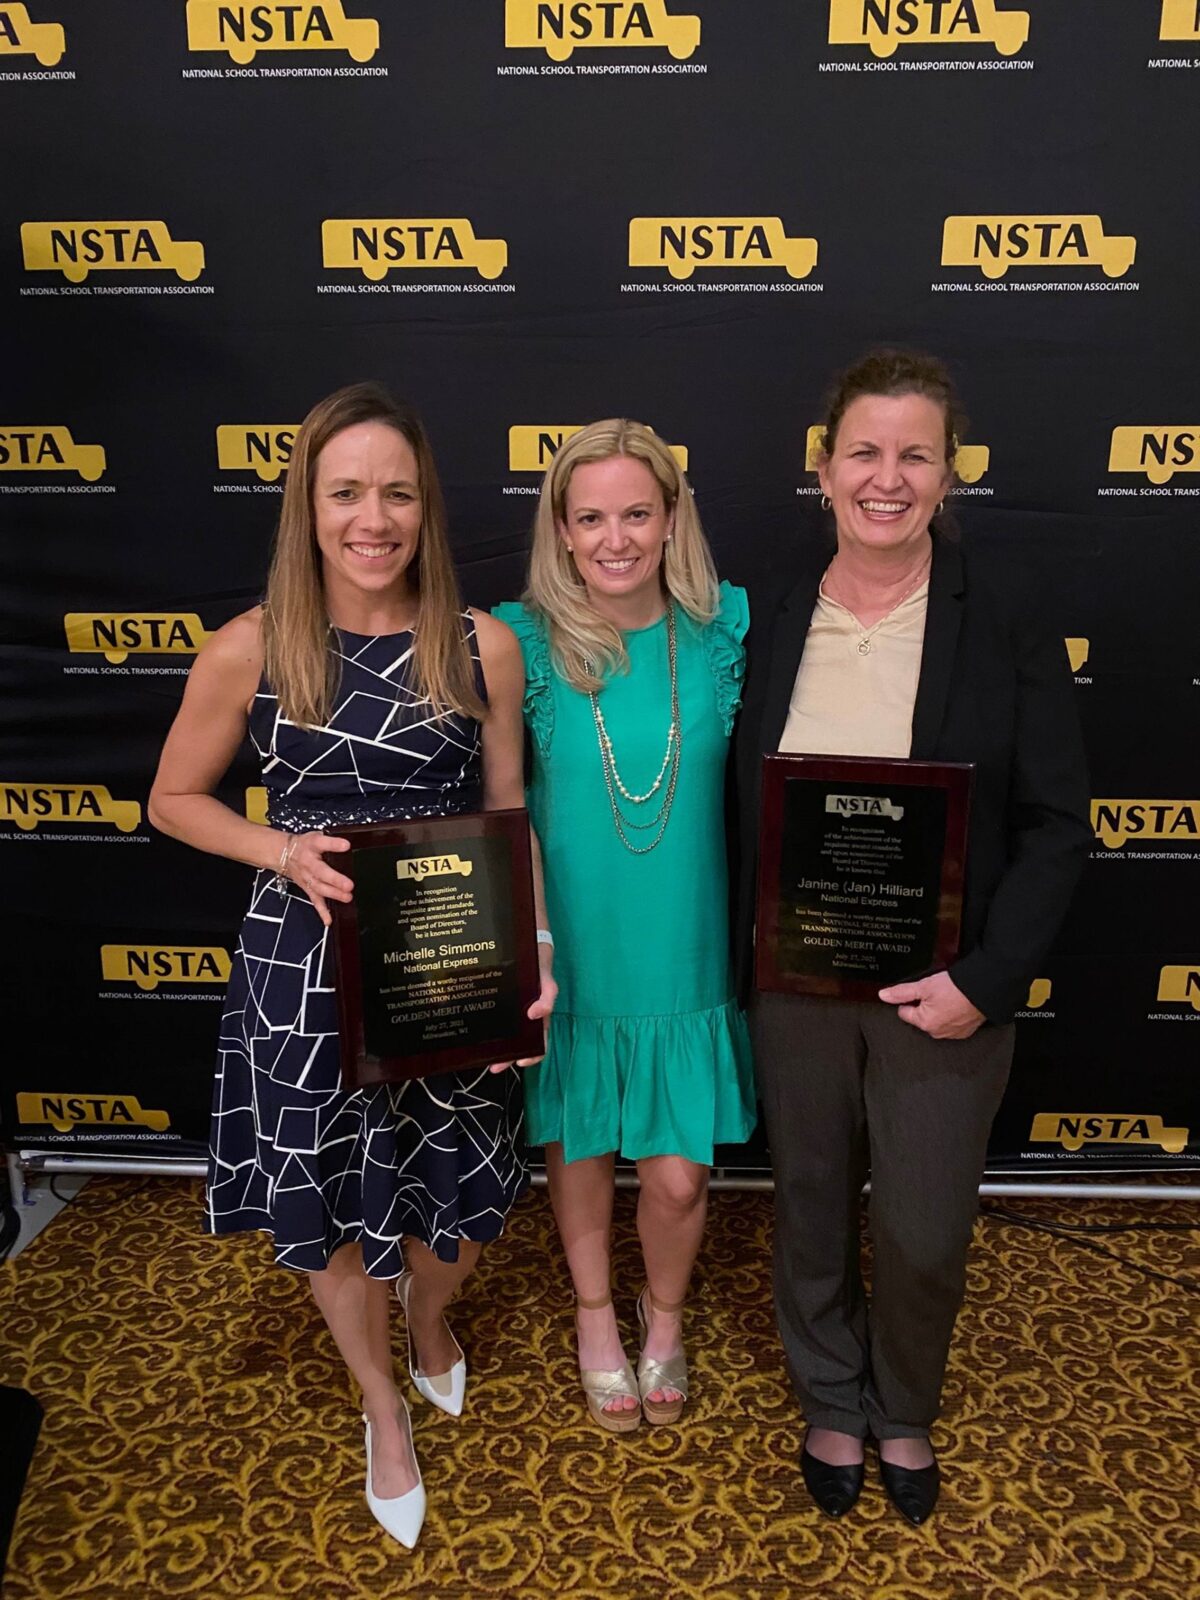 Jan Hilliard and Michelle Simon Awarded the Golden Merit Award by the National Student Transportation Association